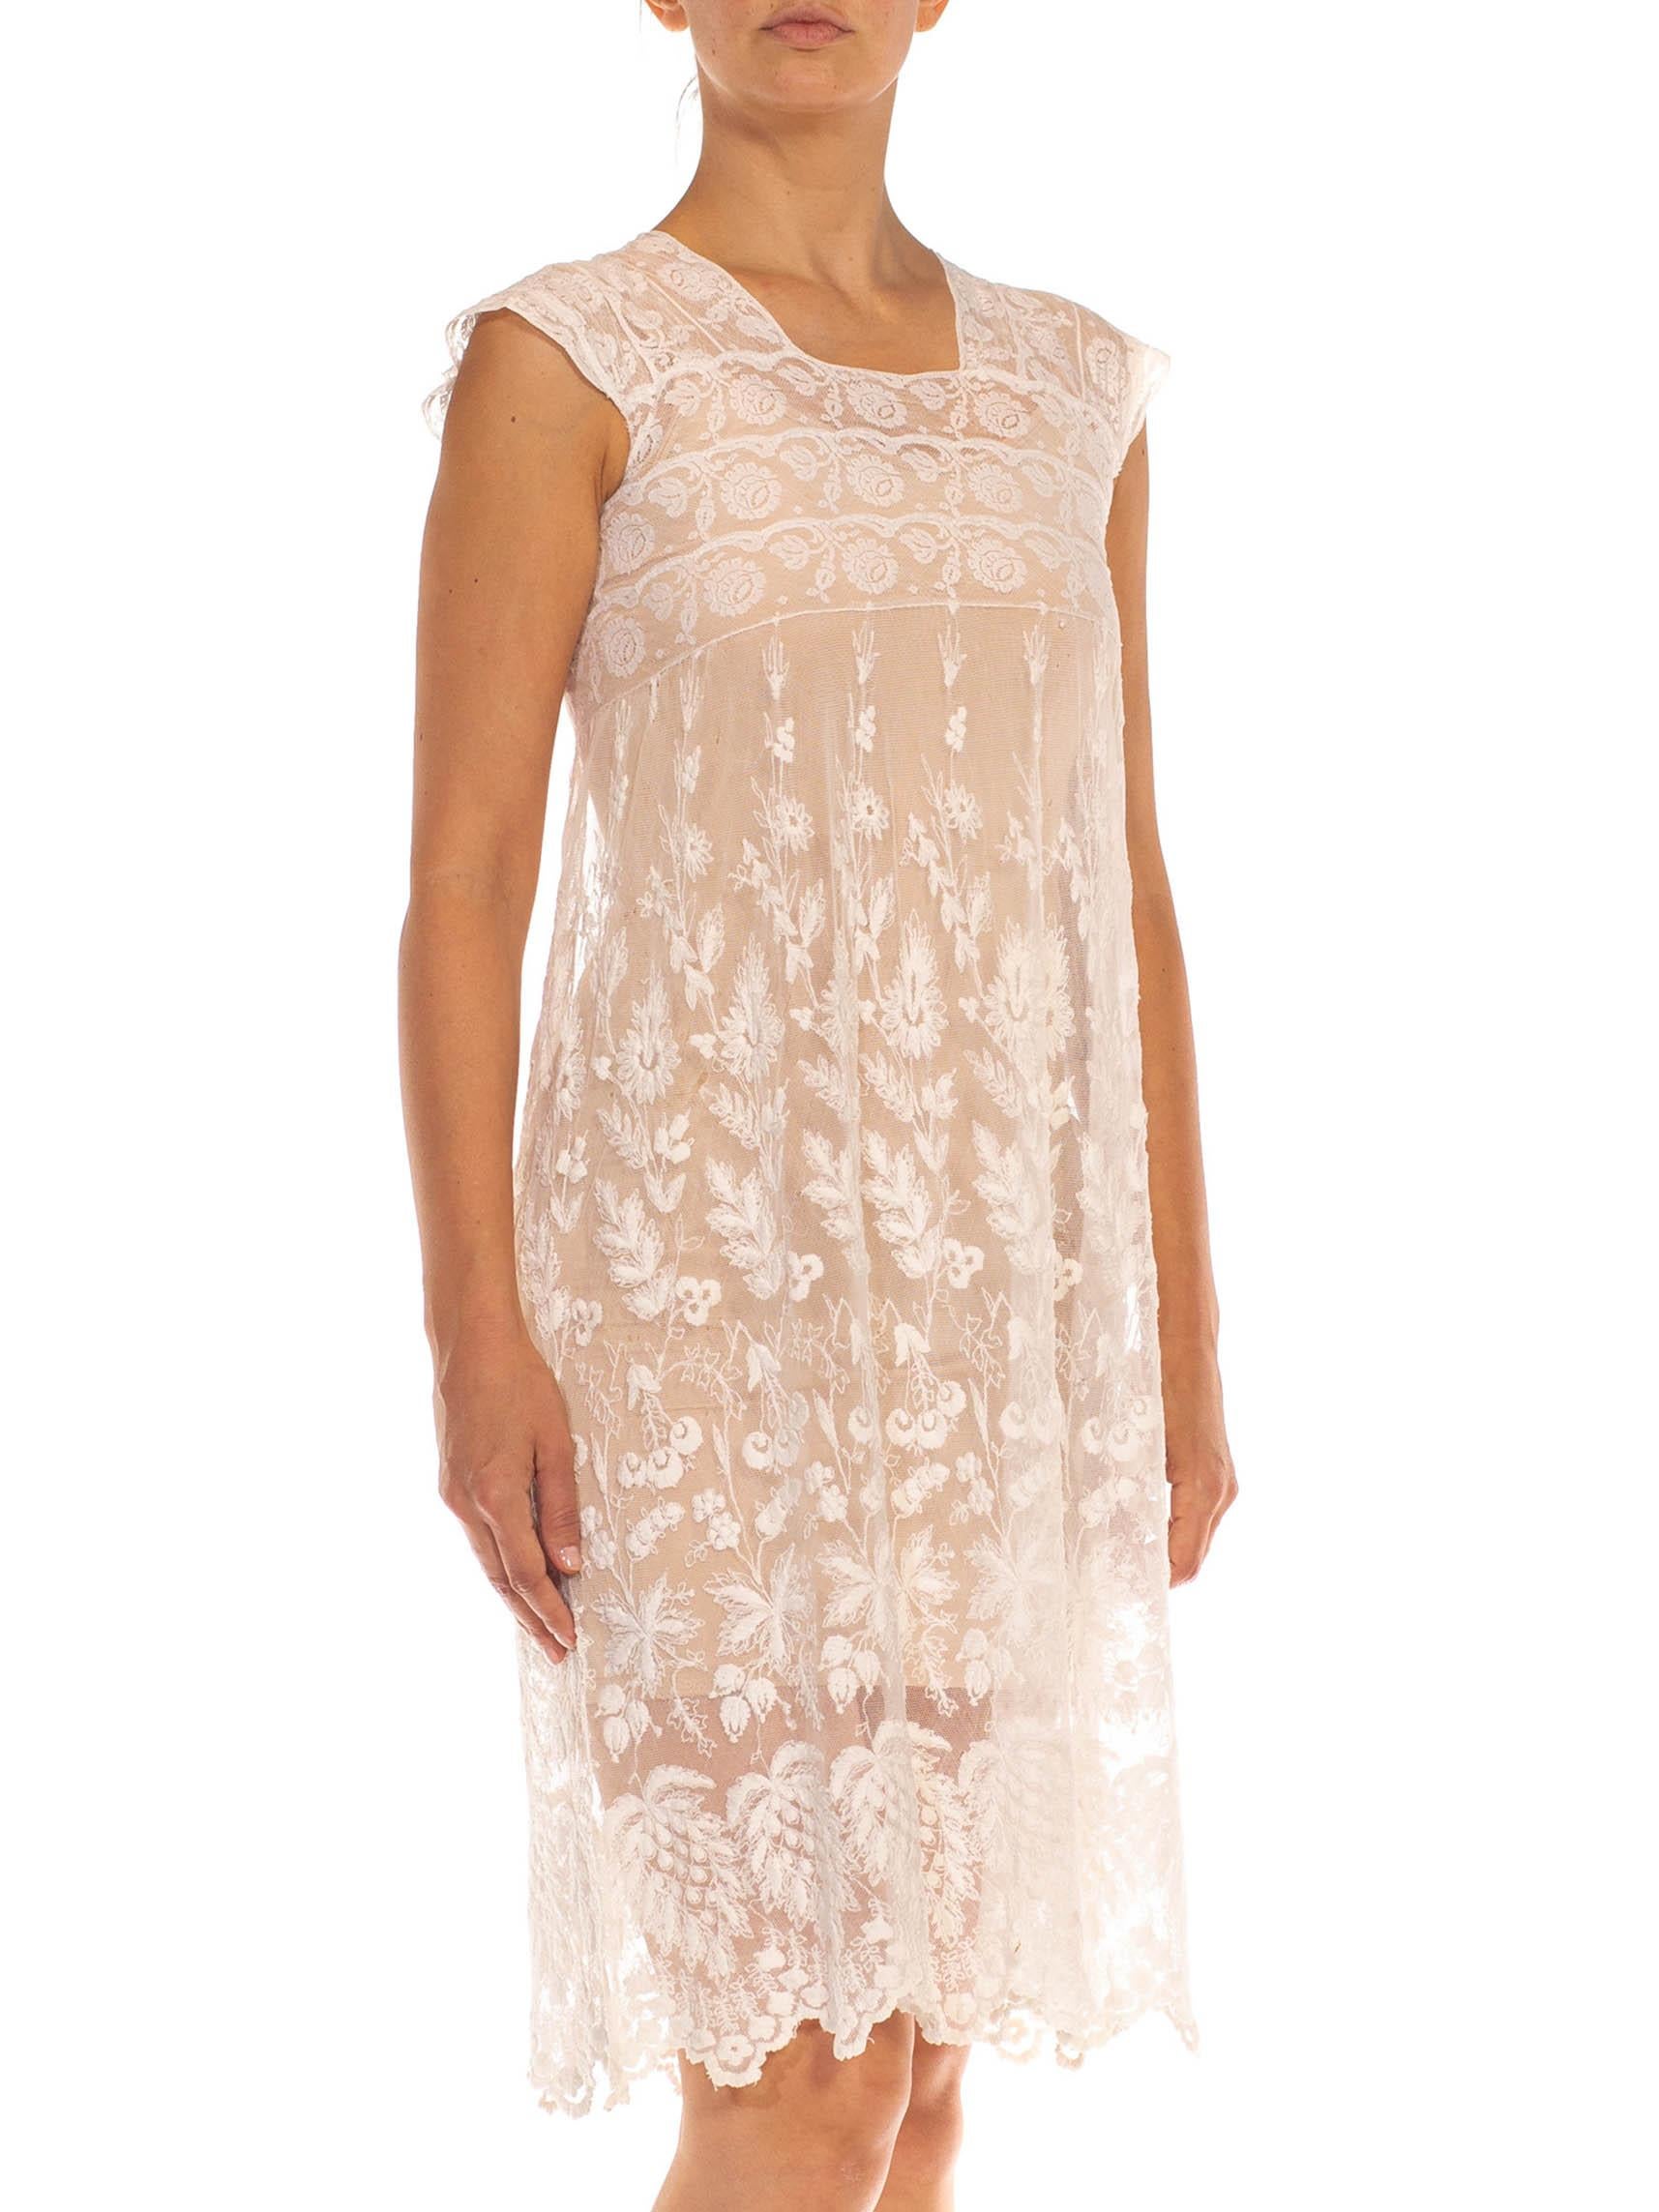 Edwardian White Lace Baby Doll Sleeveless Dress In Excellent Condition For Sale In New York, NY